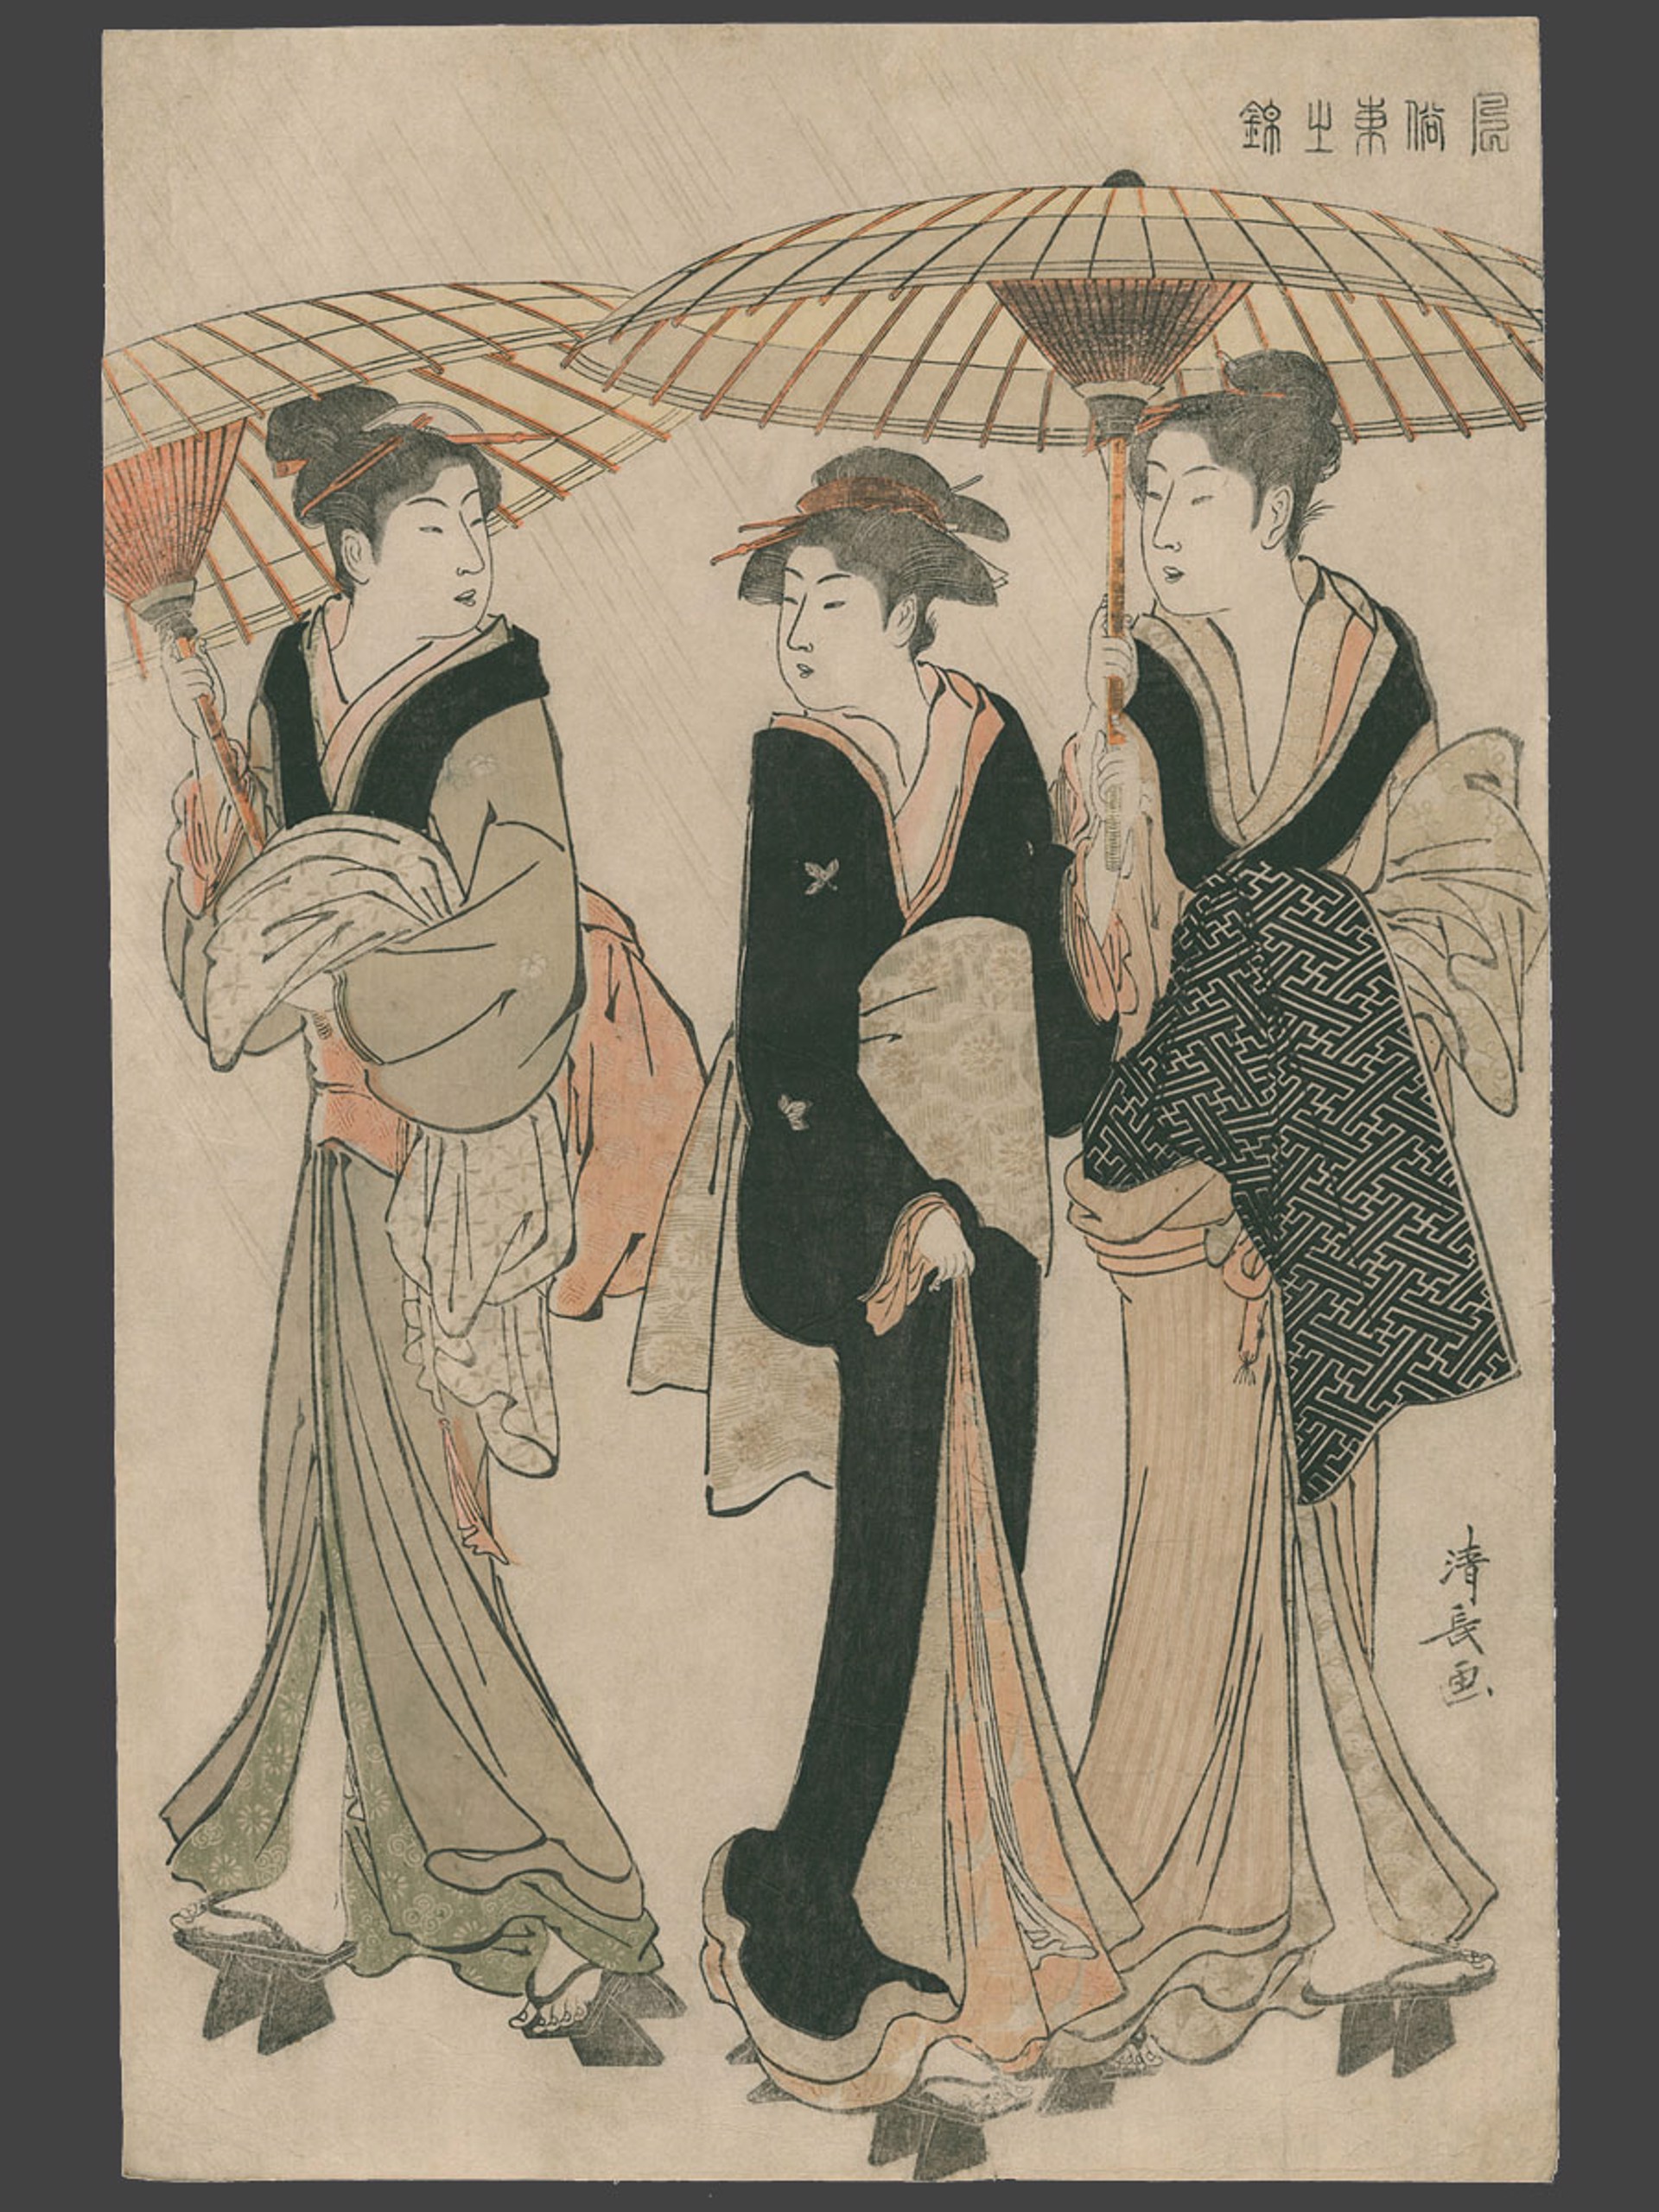 Three (3) Women in the Rain Beauties of the East as Reflected in Fashions by Kiyonaga